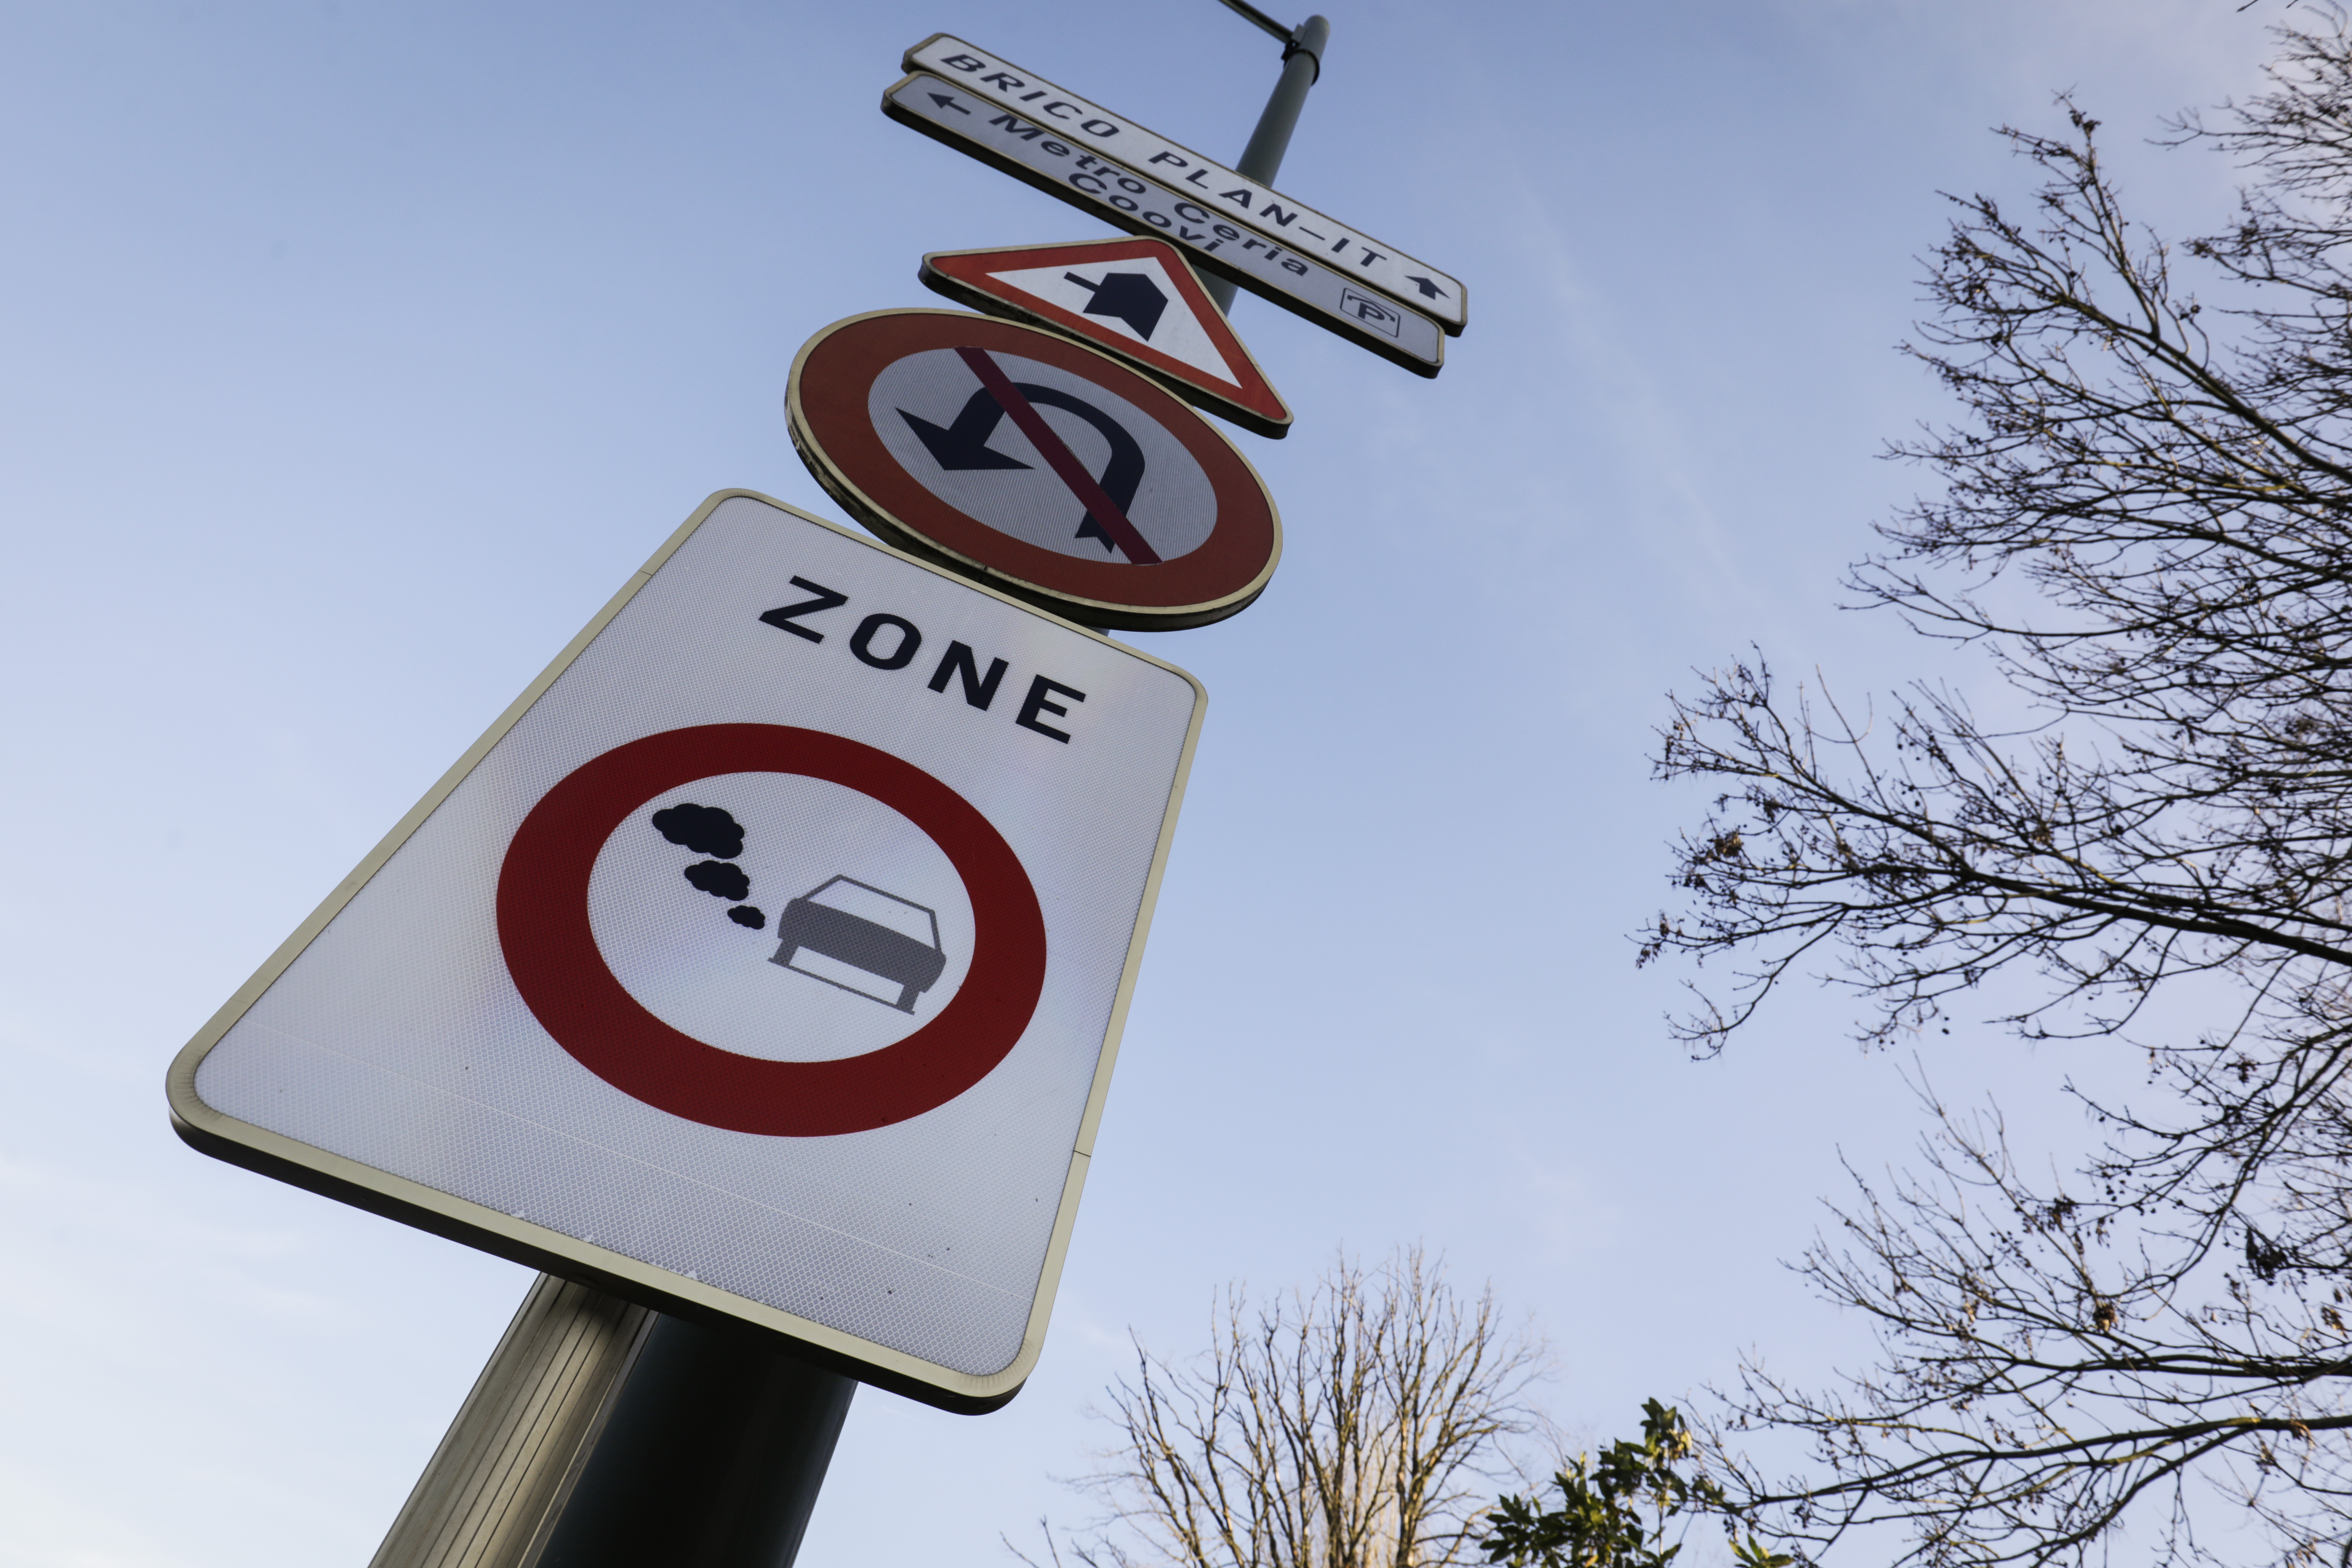 ‘Low-emission zones under fire, but they are effective for soot’